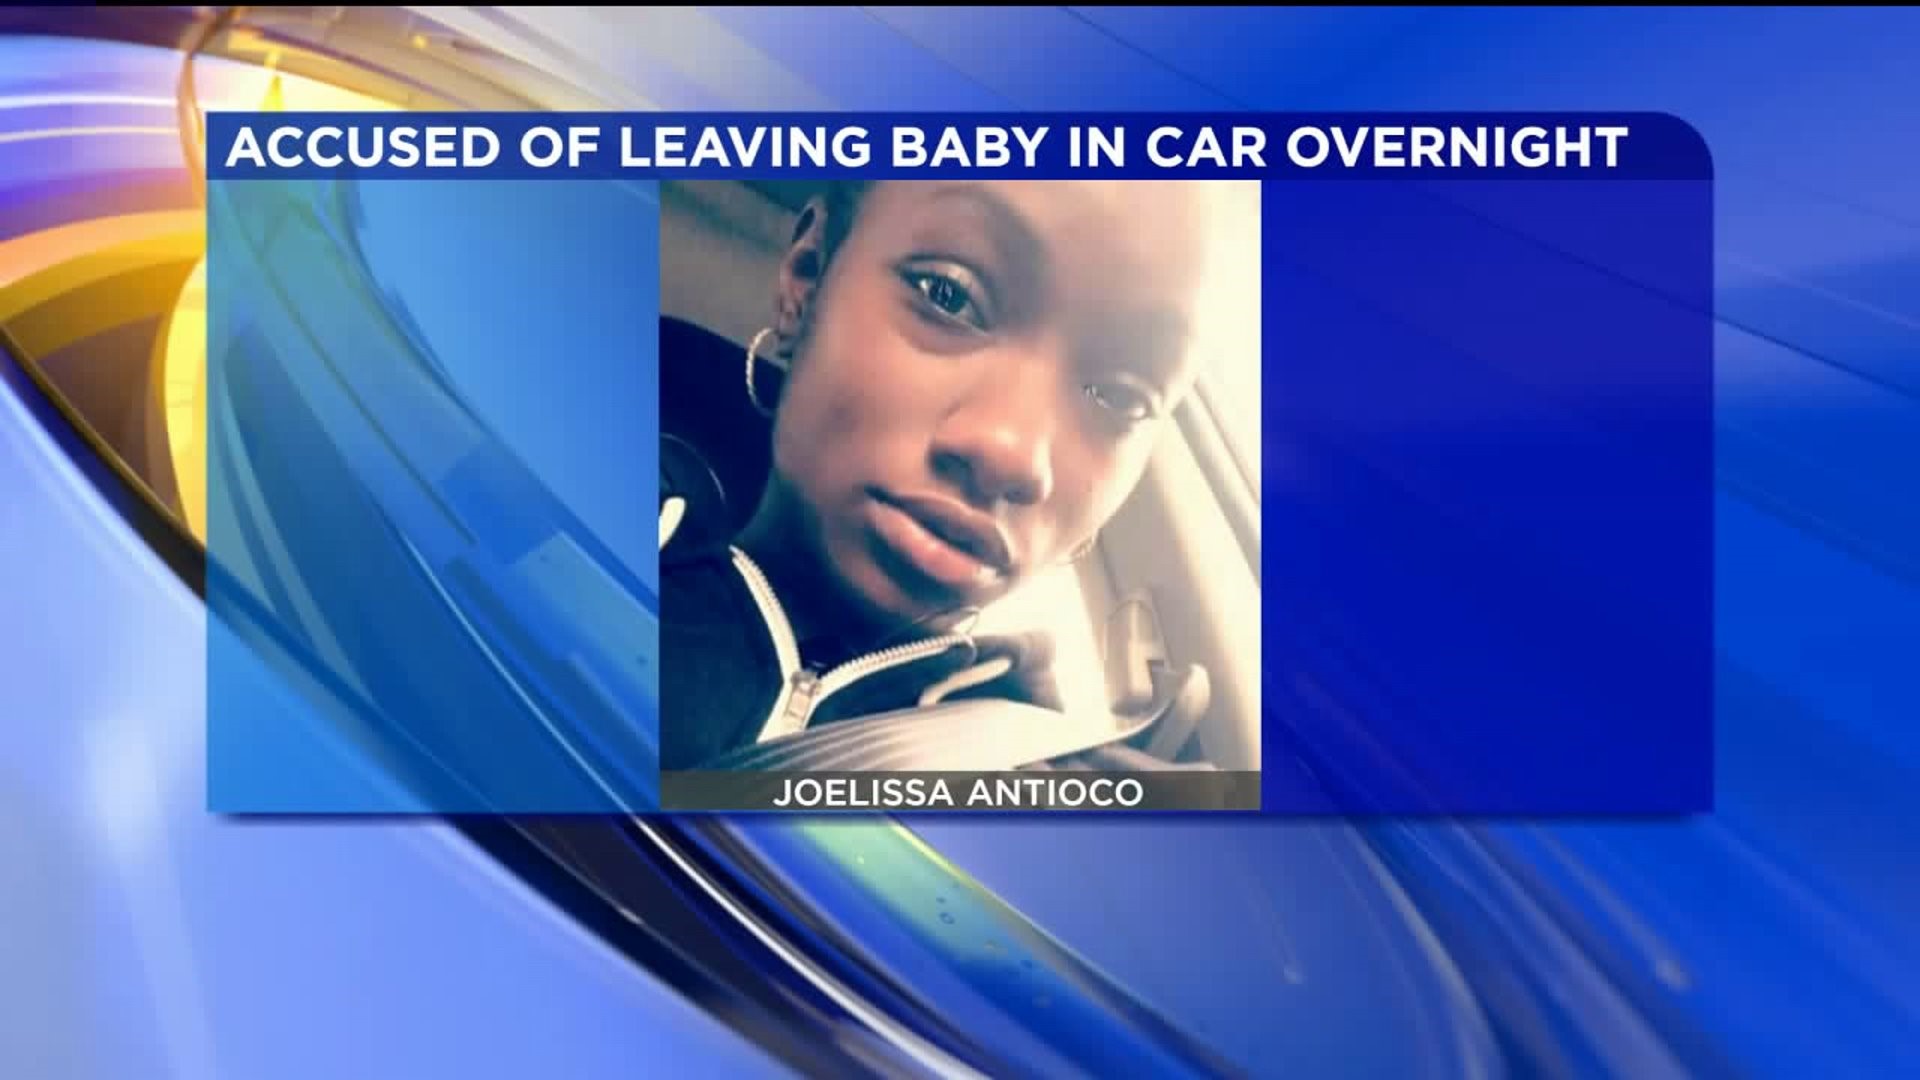 Woman Accused of Leaving Child in Car in Frigid Conditions